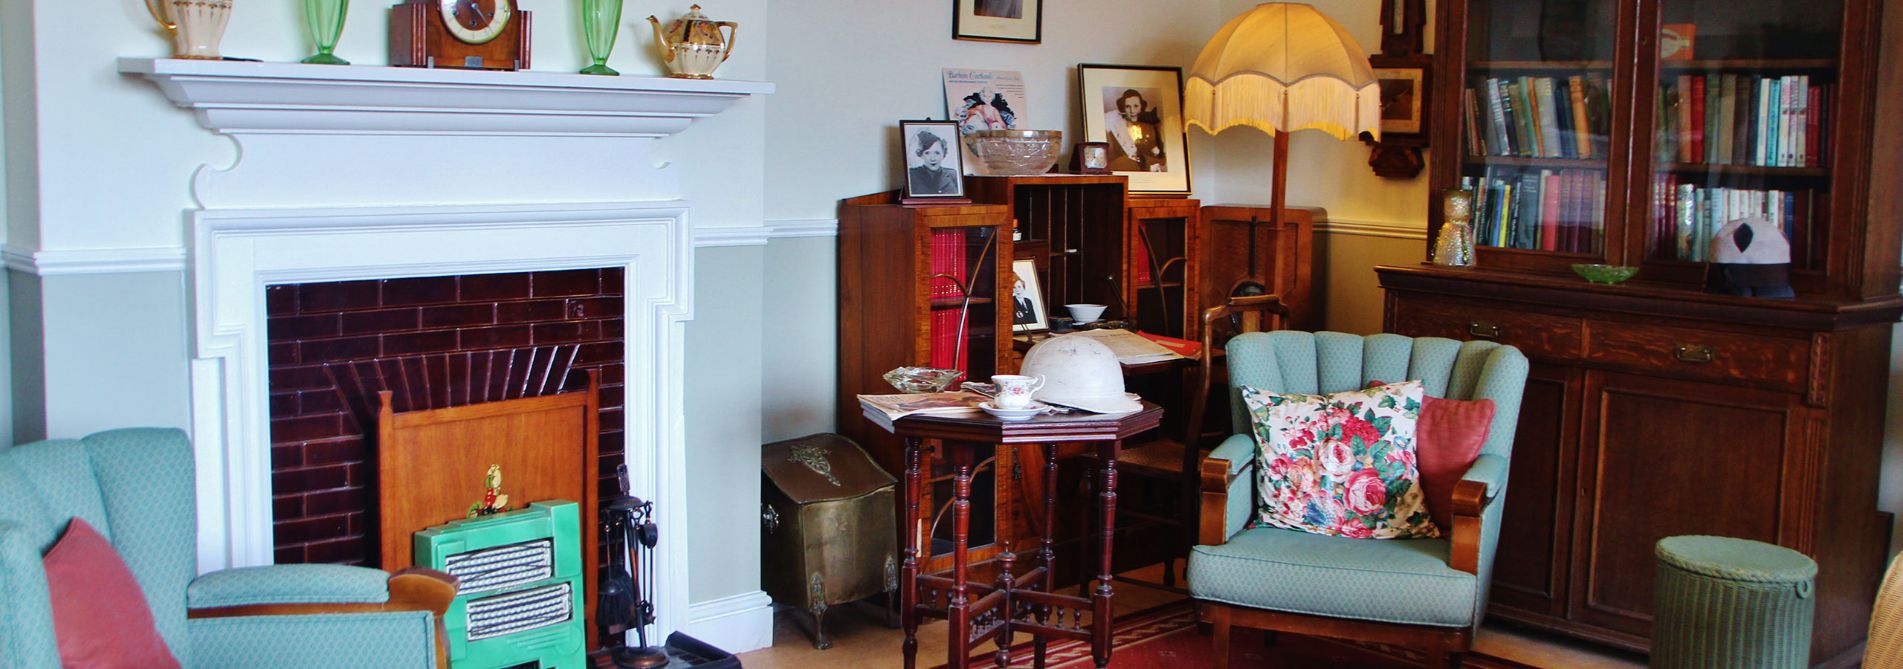 Clubhouse-reading-room-header.jpg